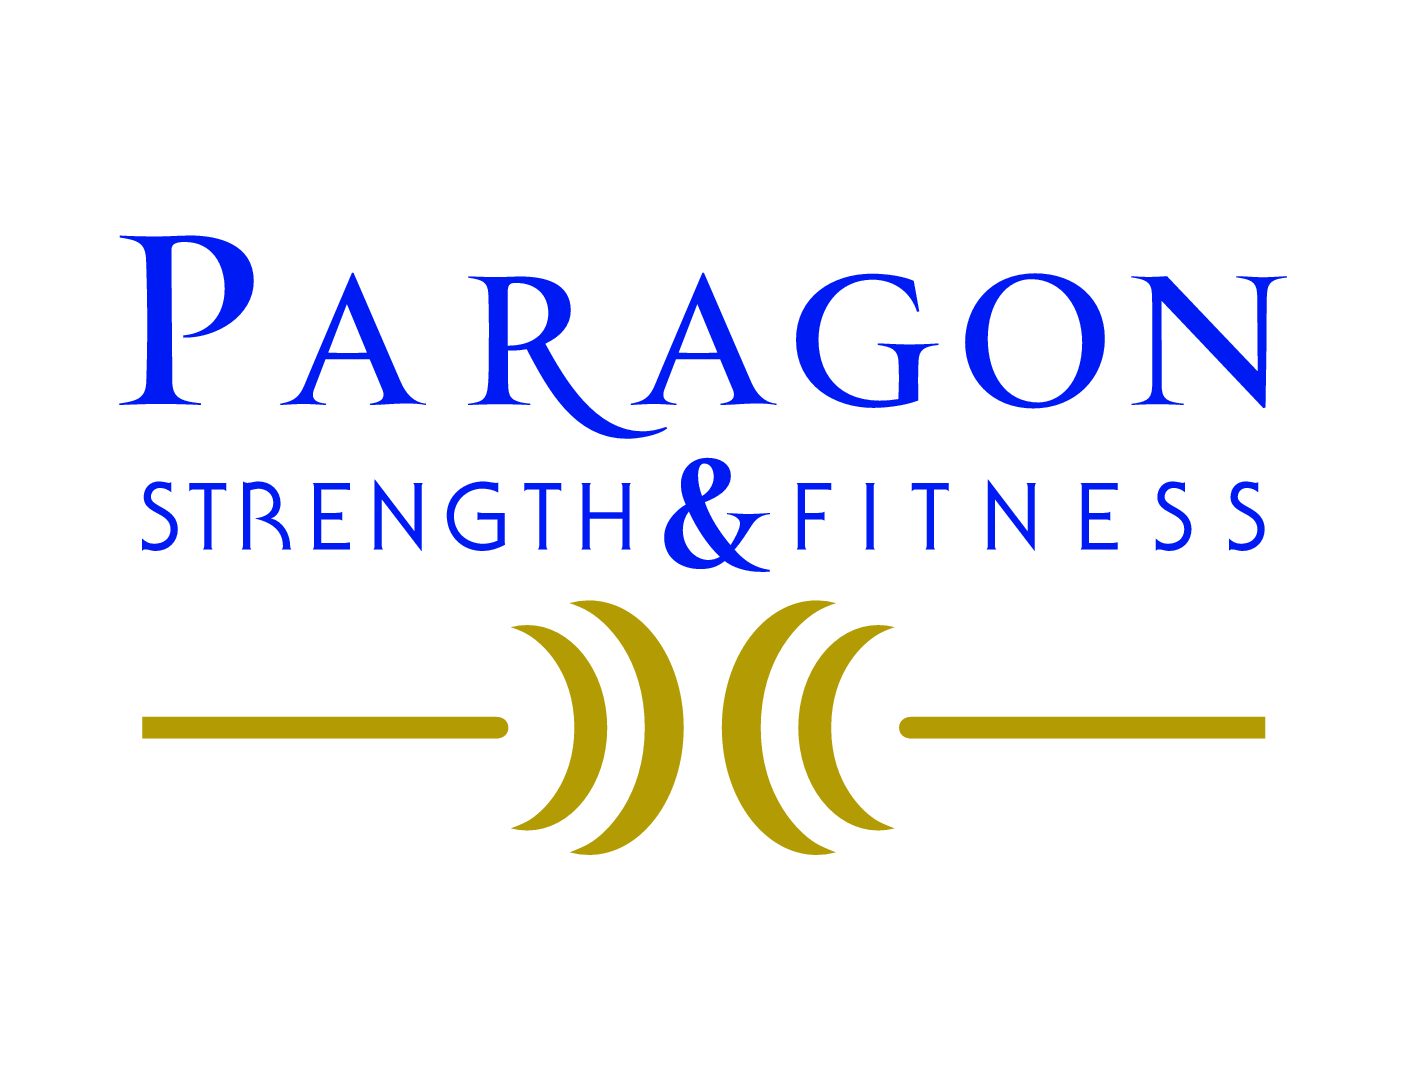 Our Team - Paragon Fitness